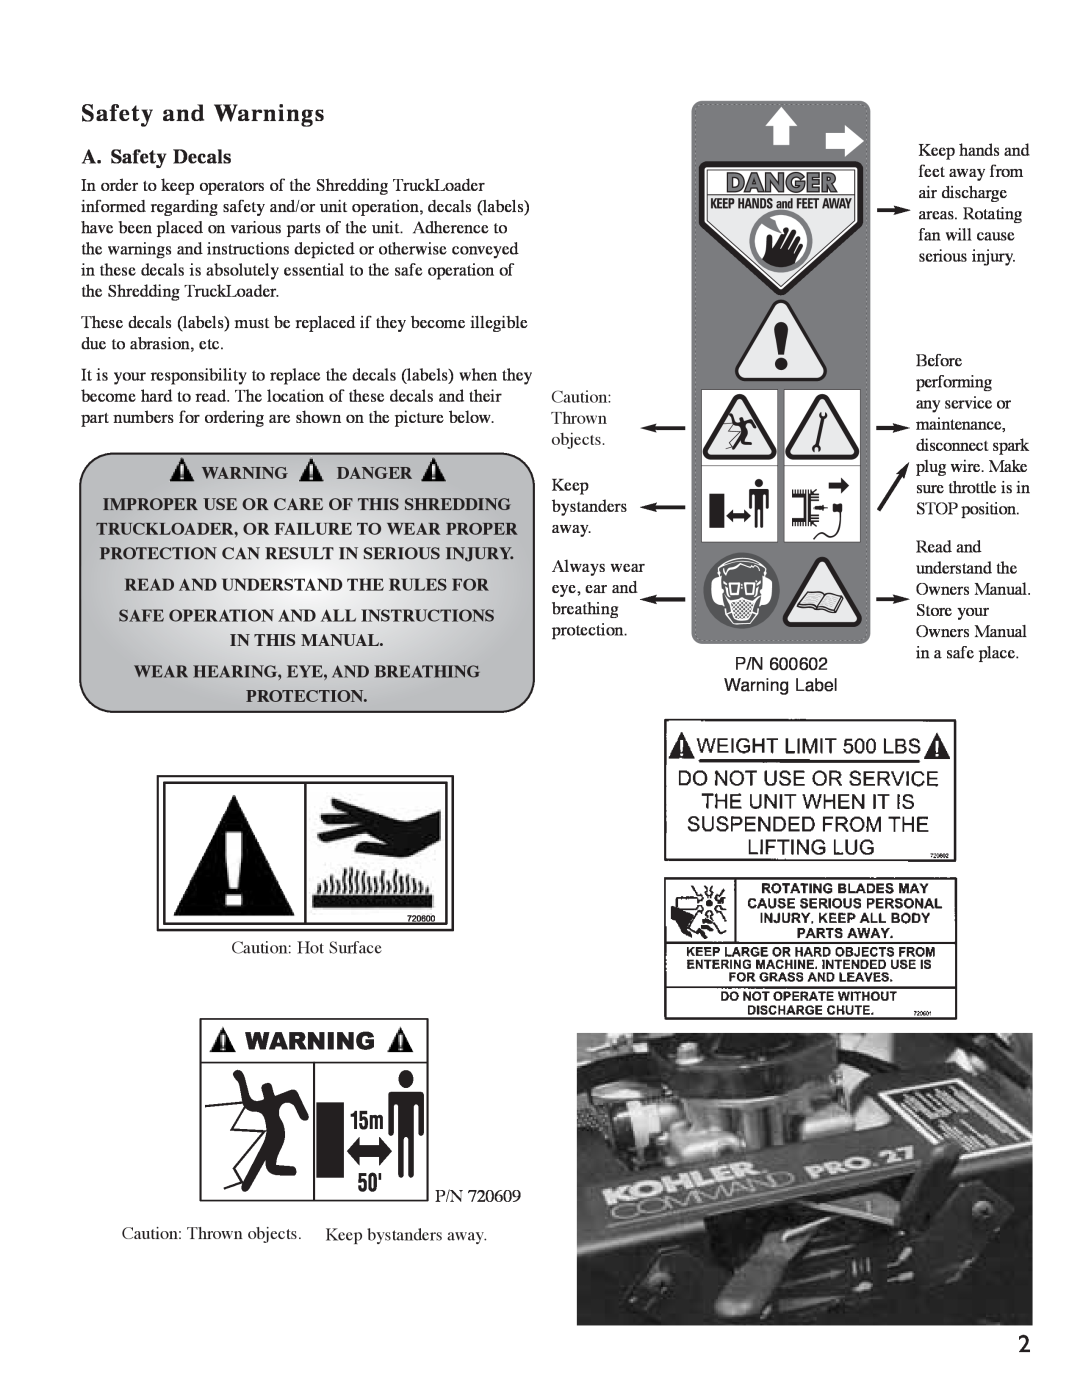 Little Wonder 8221, 8271 manual Safety and Warnings, A. Safety Decals 